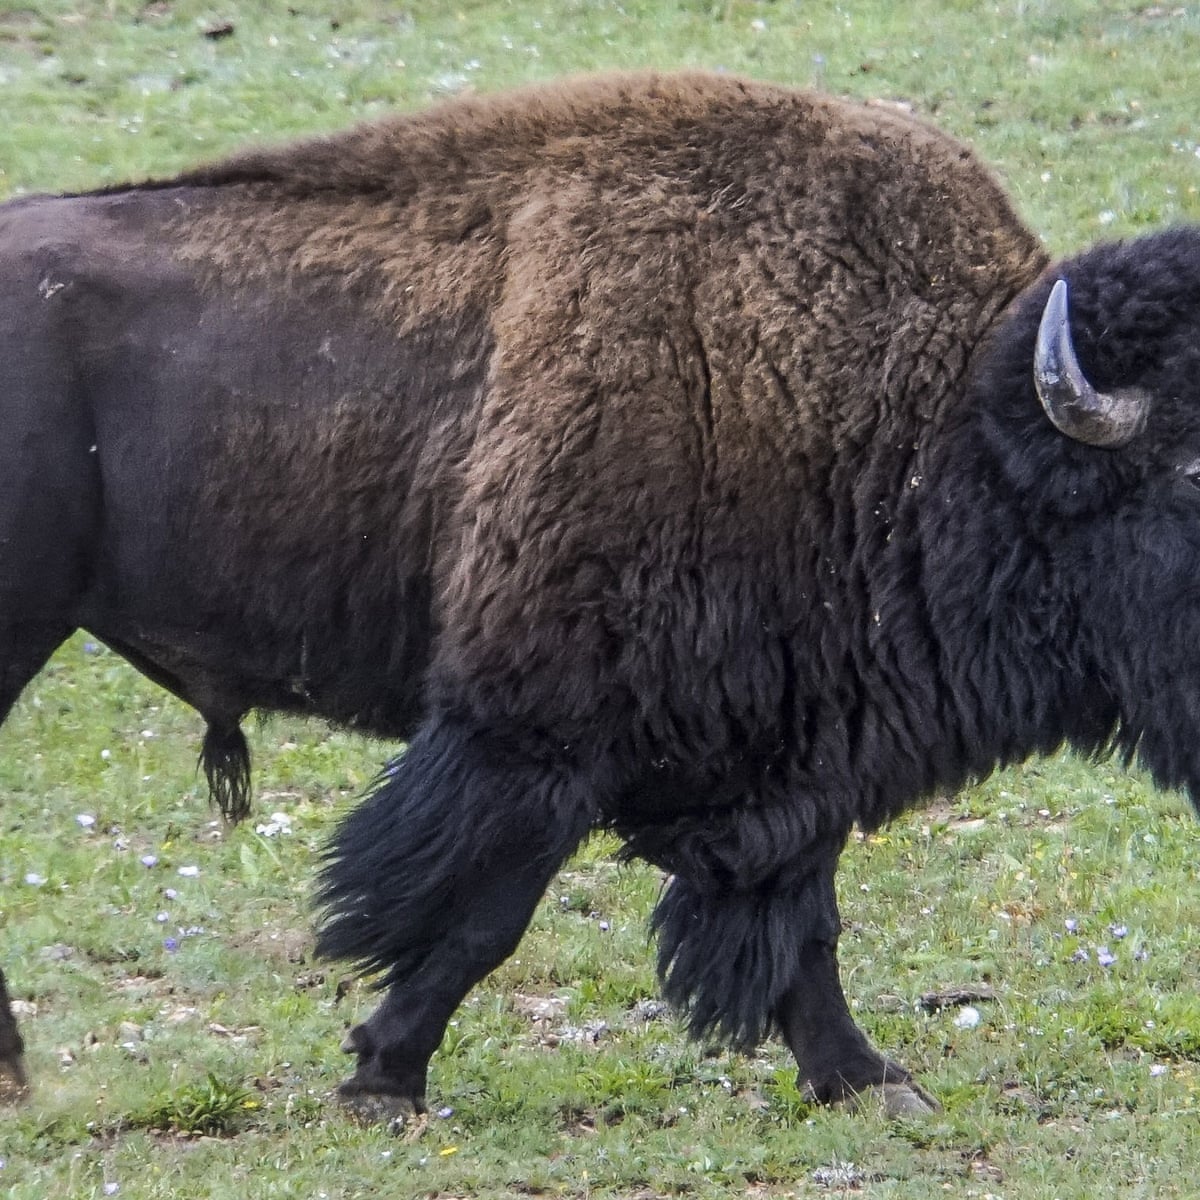 I was too close': Texas woman gored by bison shares video to warn hikers |  Animals | The Guardian